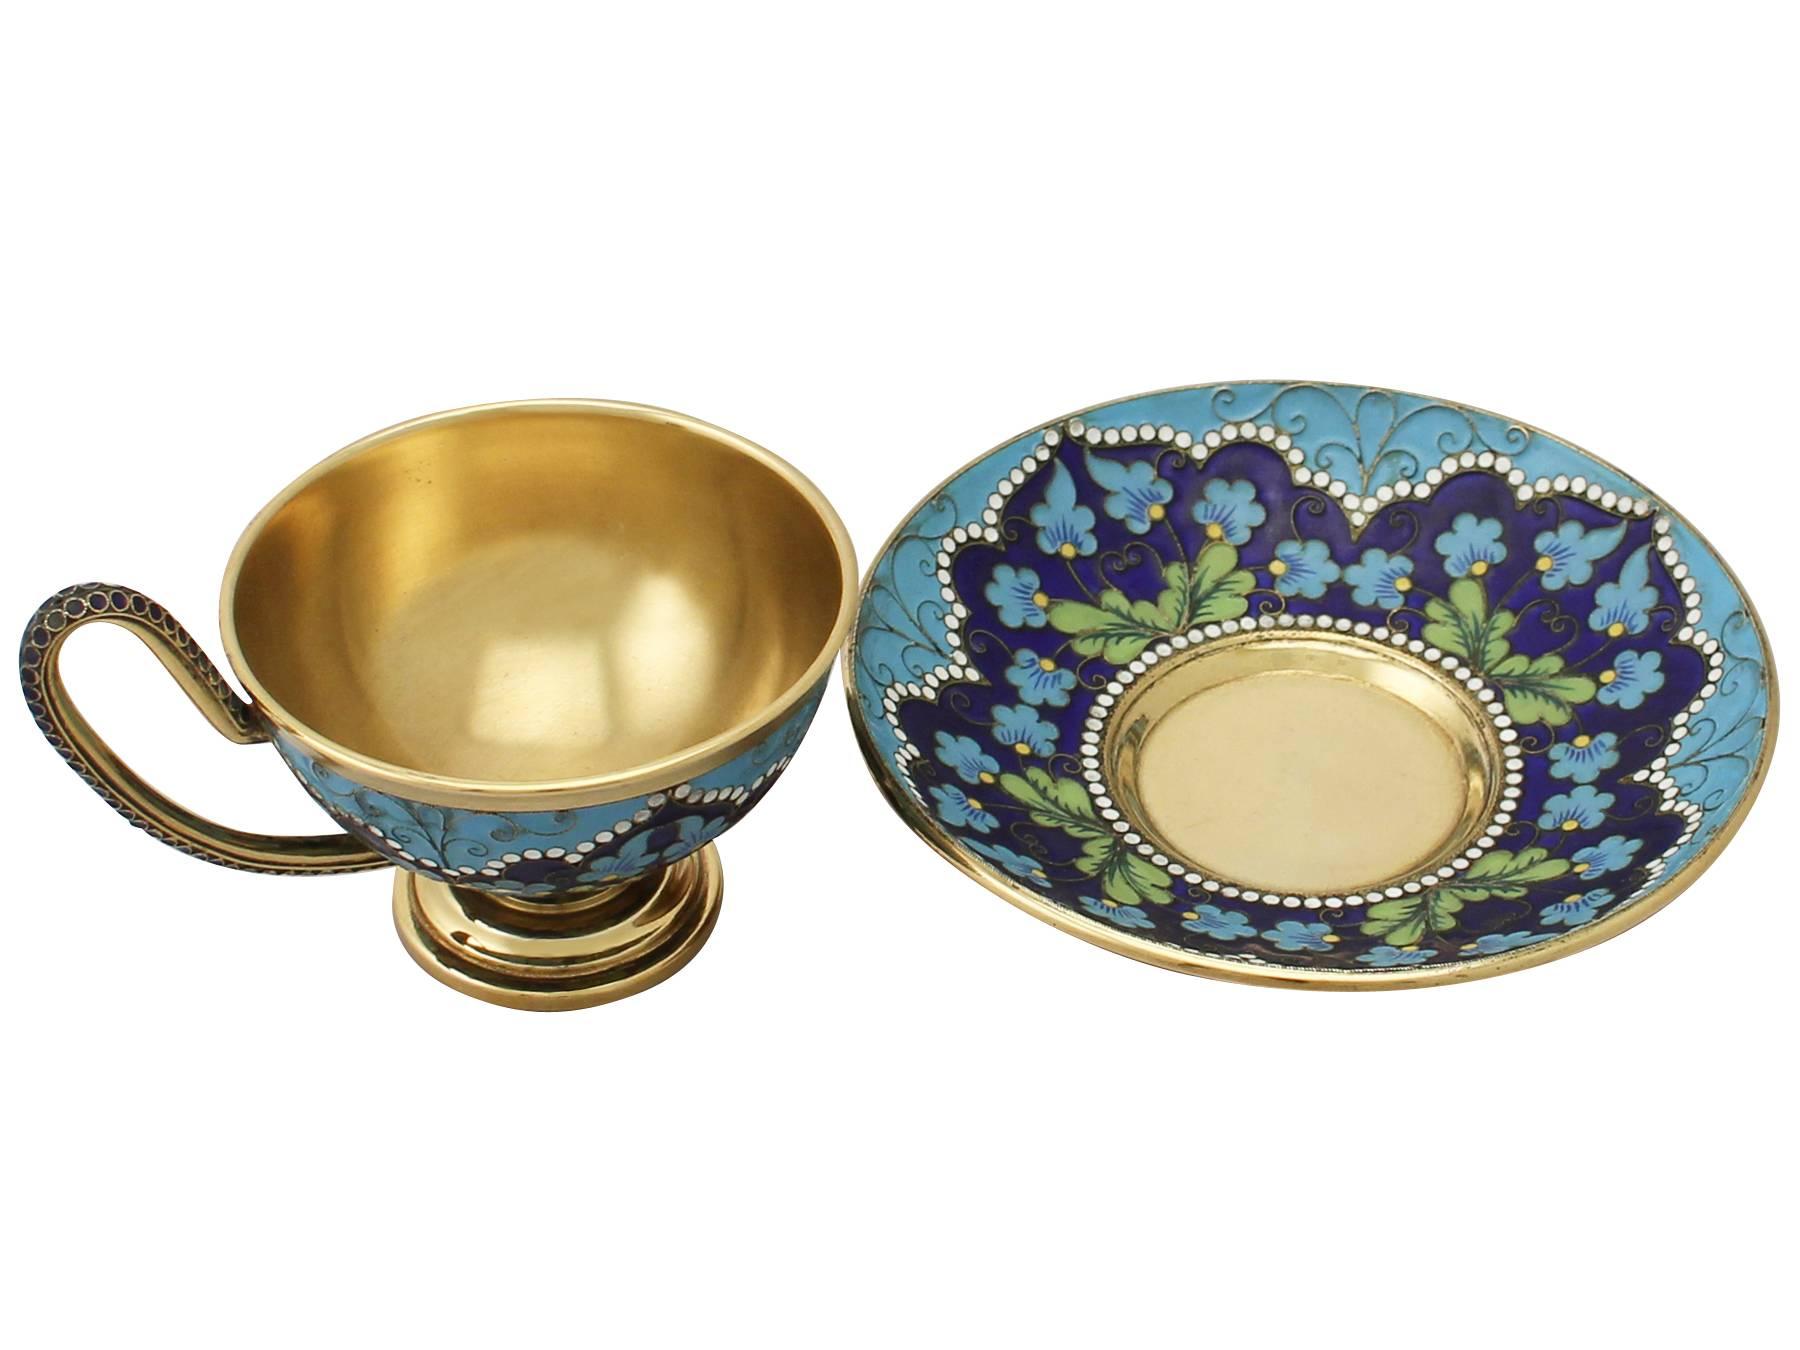 Late 20th Century Russian Silver Gilt and Polychrome Cloisonné Enamel Cup and Saucer